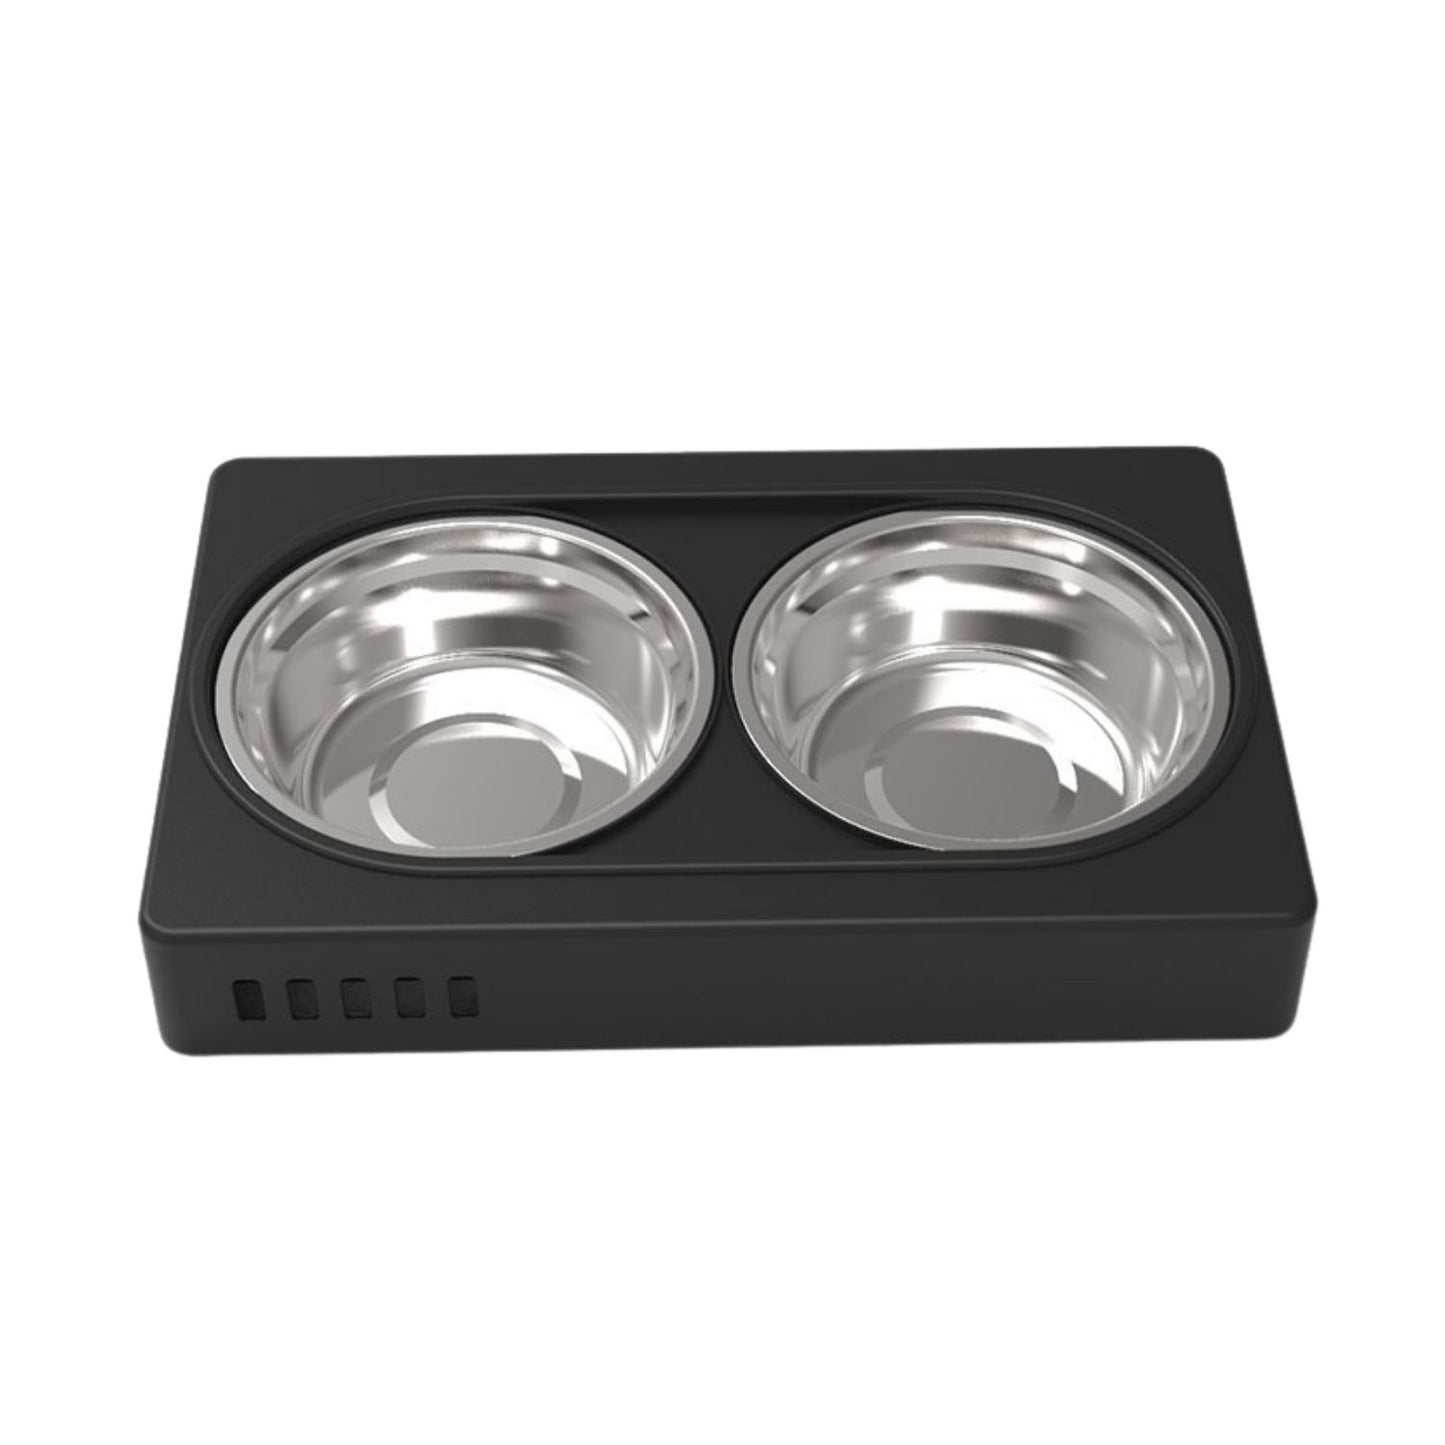 FLOOFI Double Bowl With Elevated Stand Black